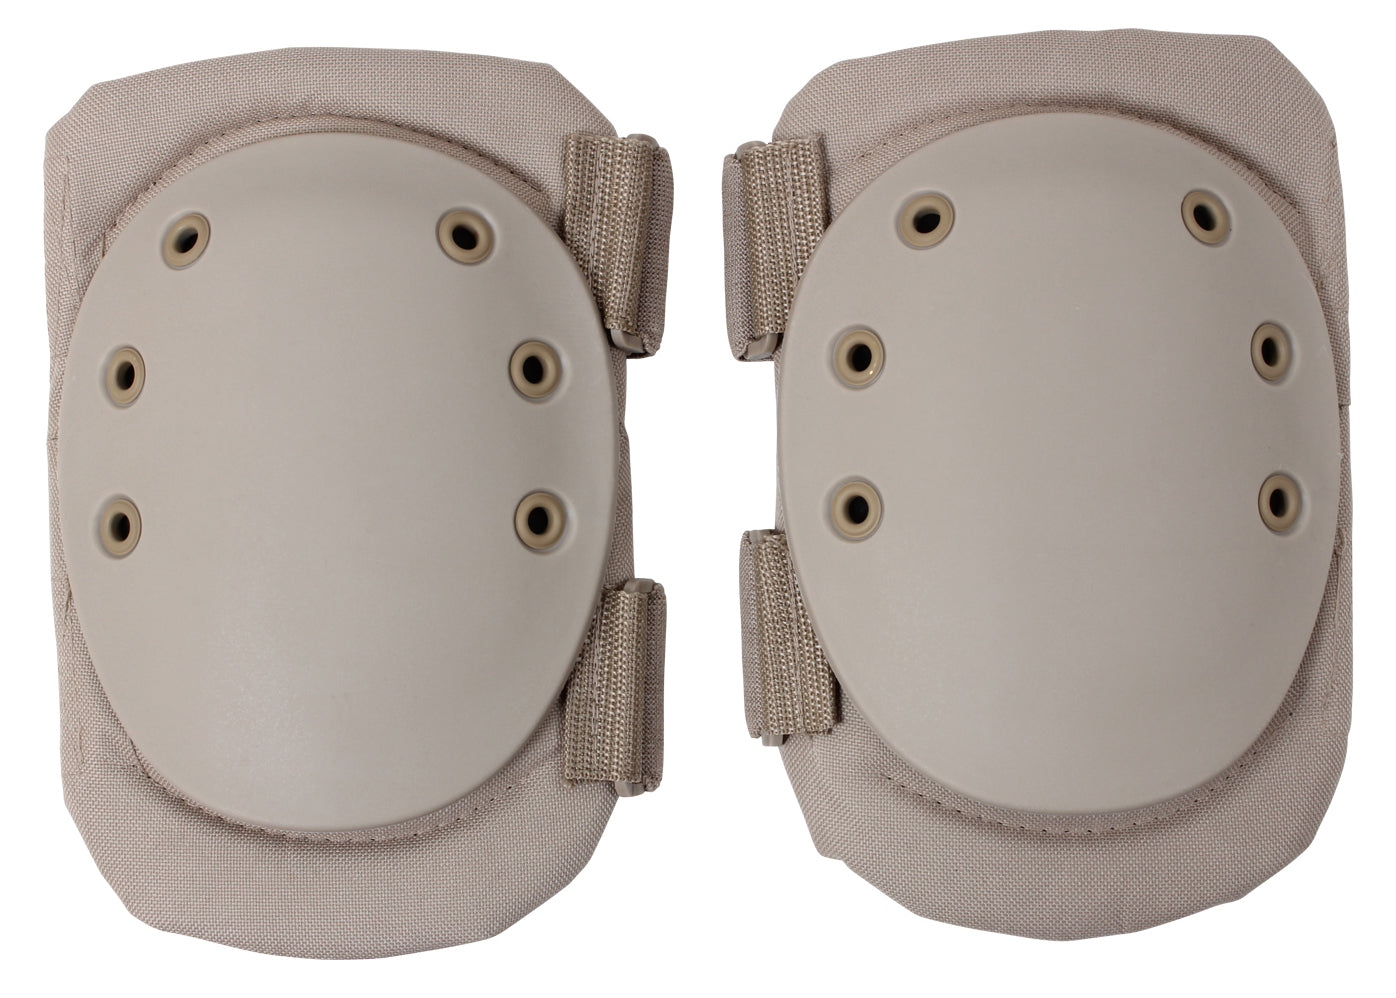 Rothco Tactical SWAT Protective Knee Pads - Solid Camo Colors